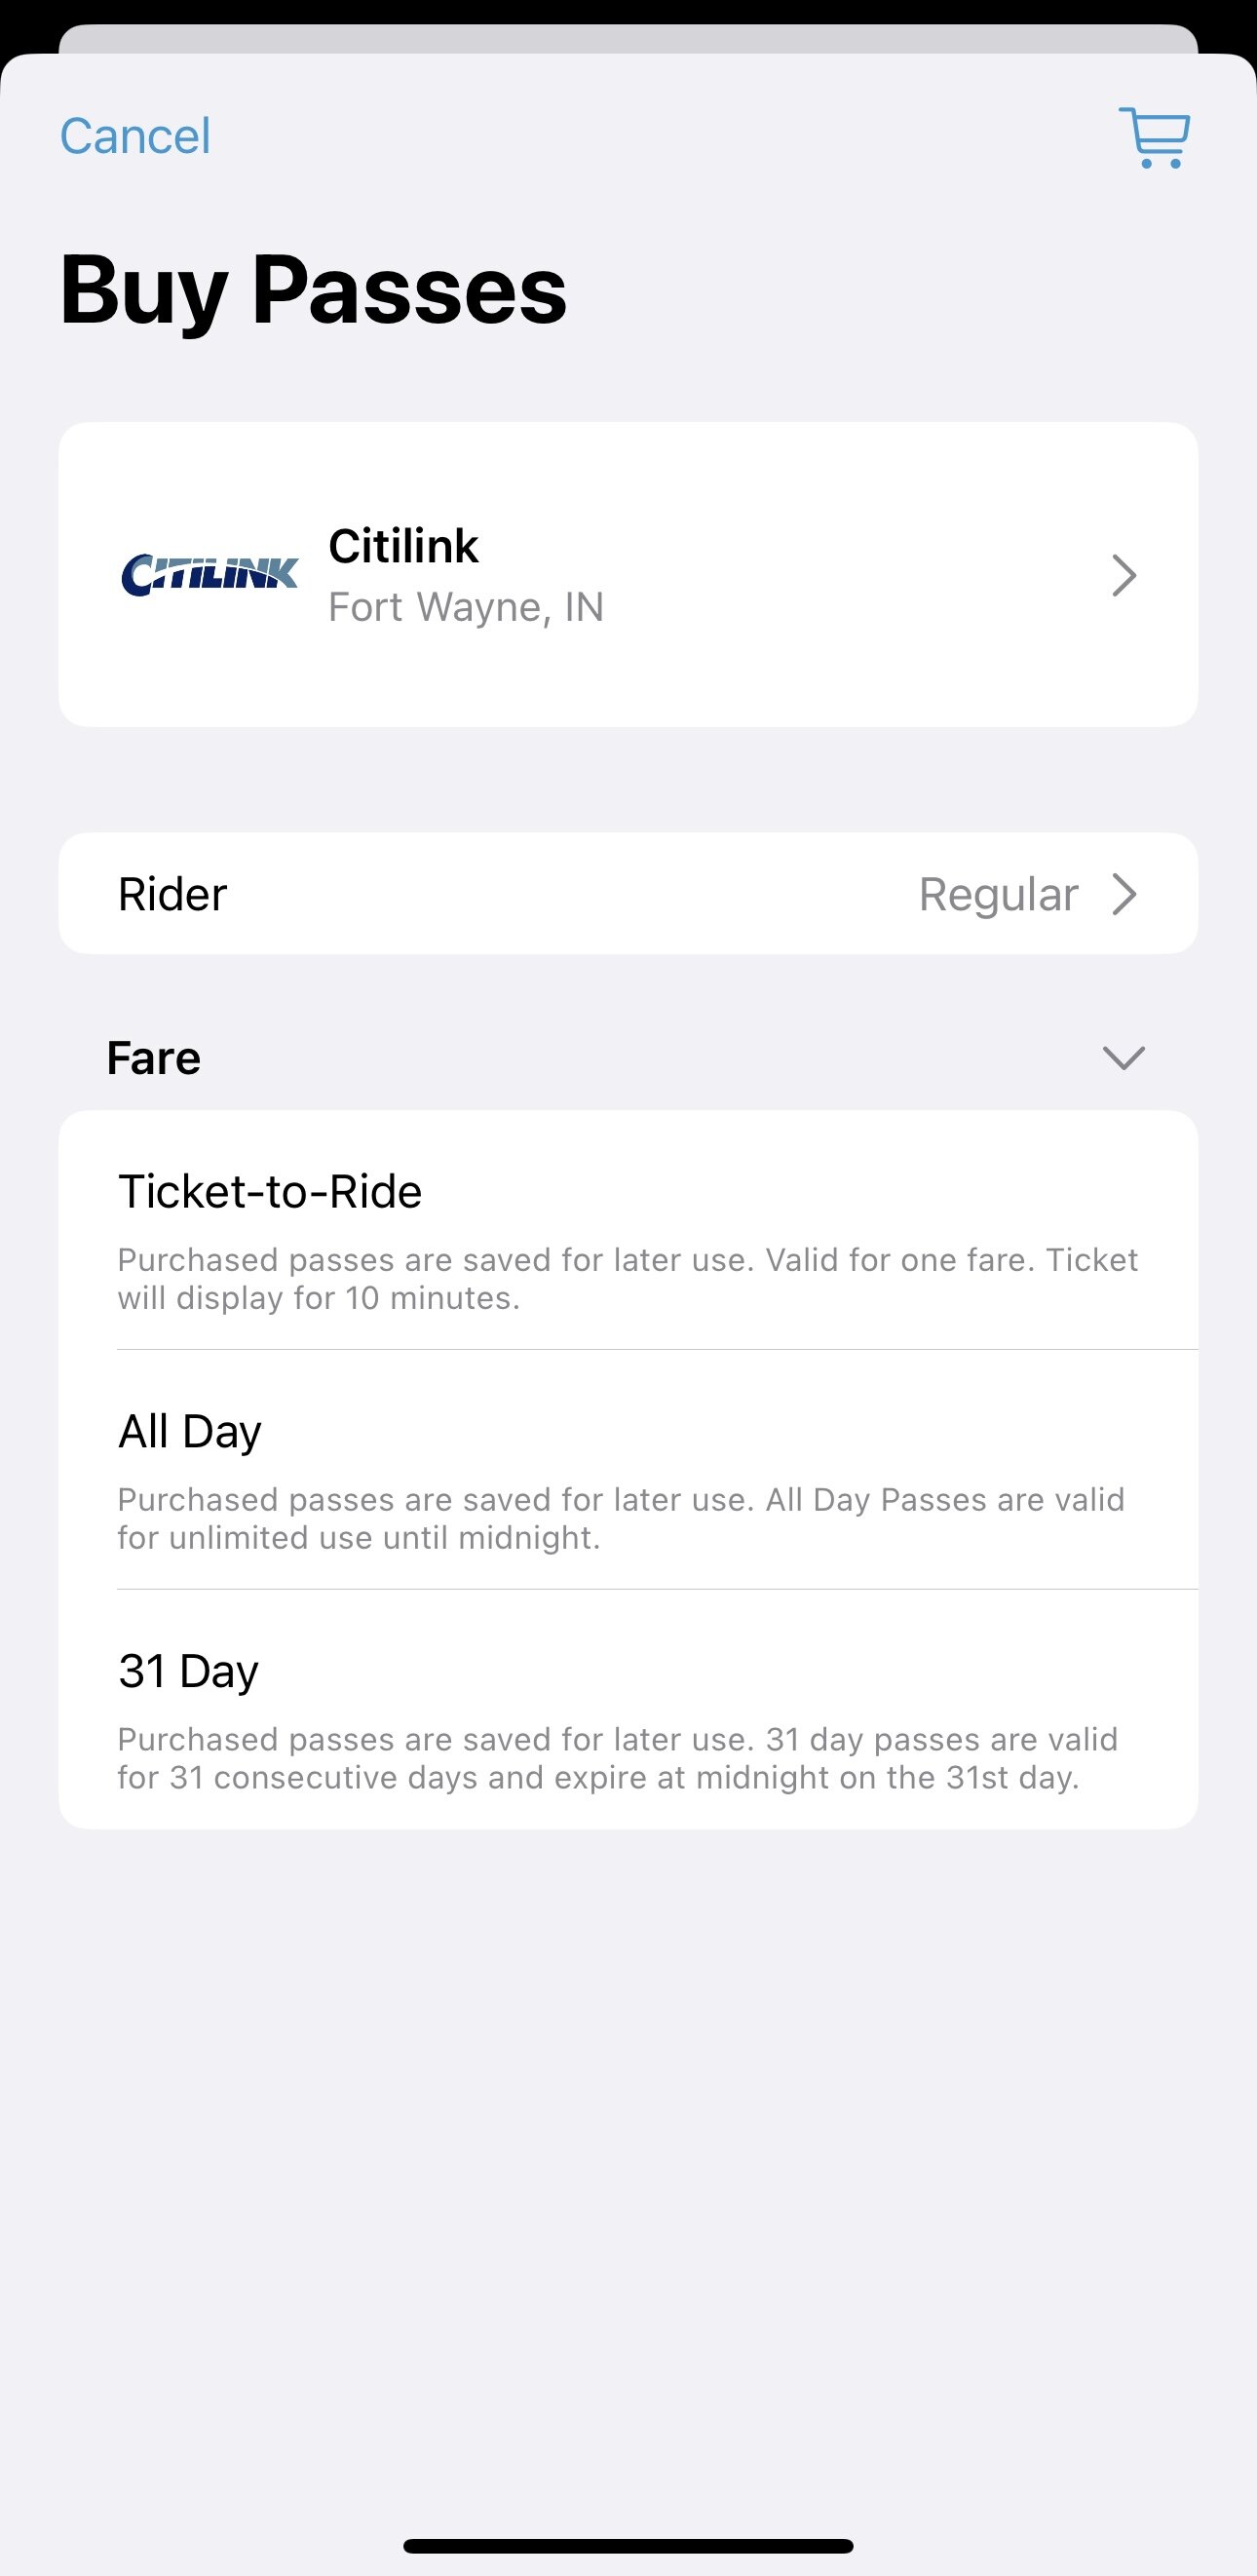 Token Transit allows riders to buy bus fare on their mobile device.